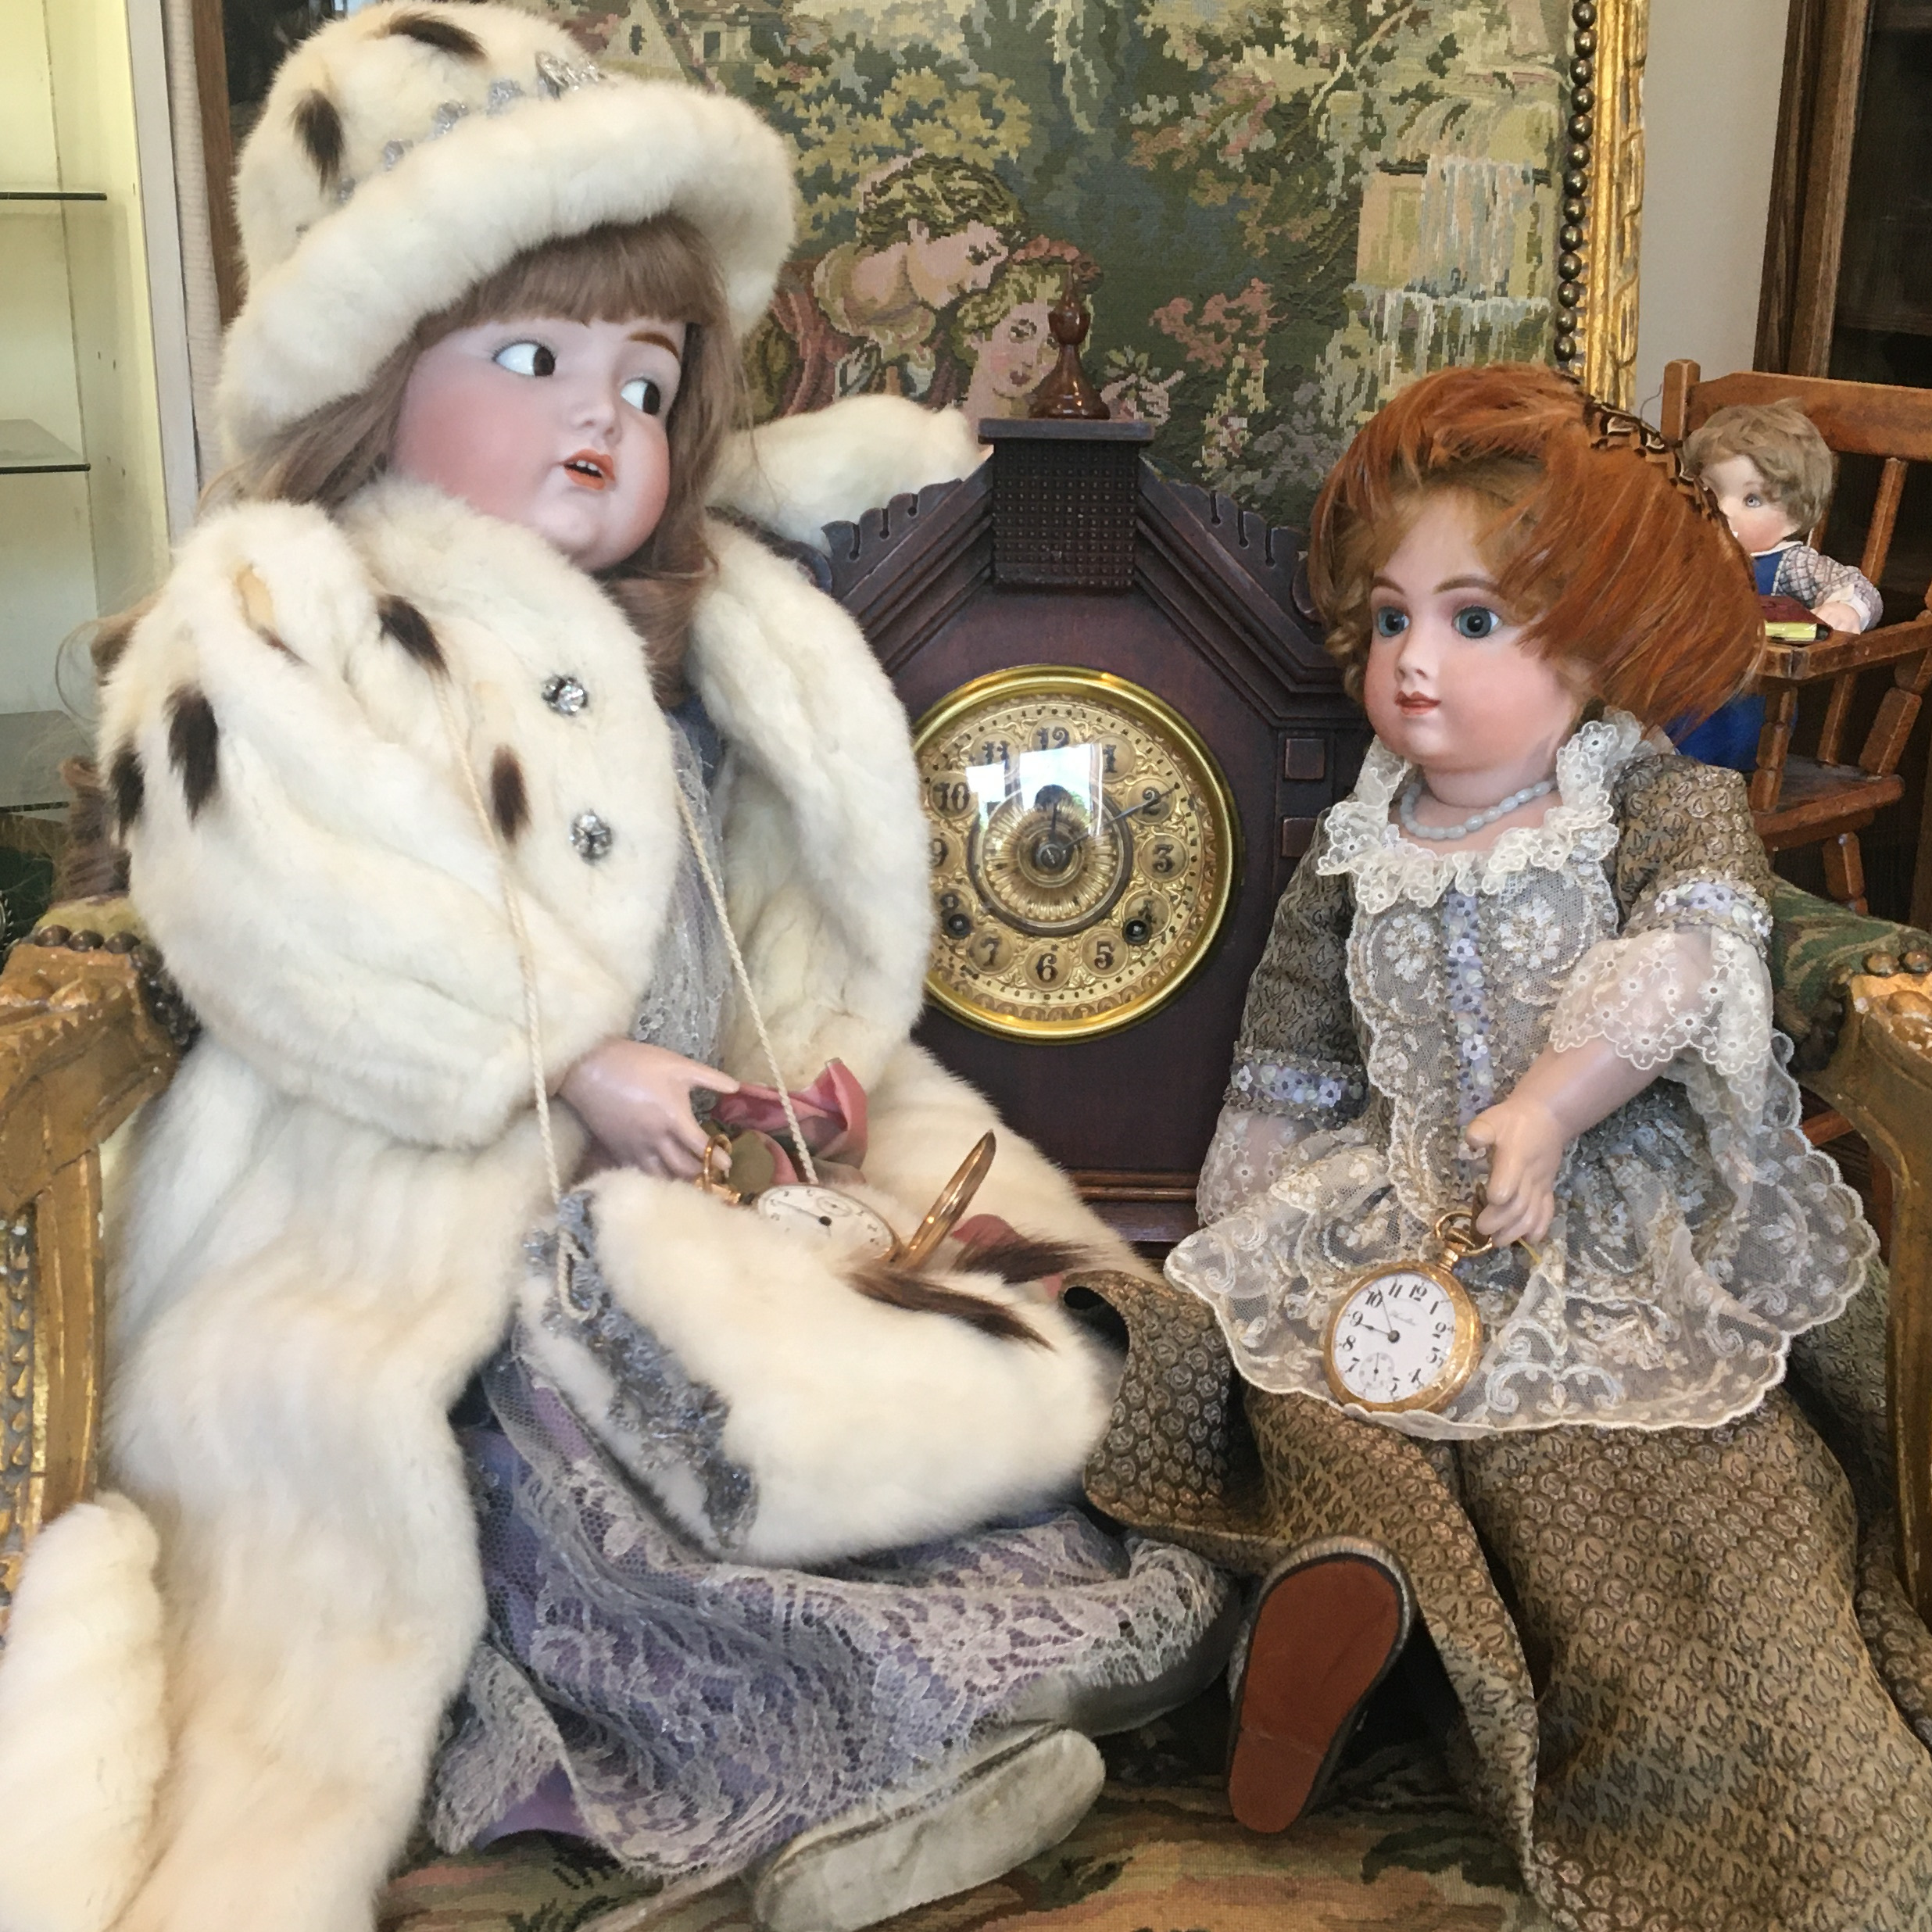 Dolls on a couch with a clock